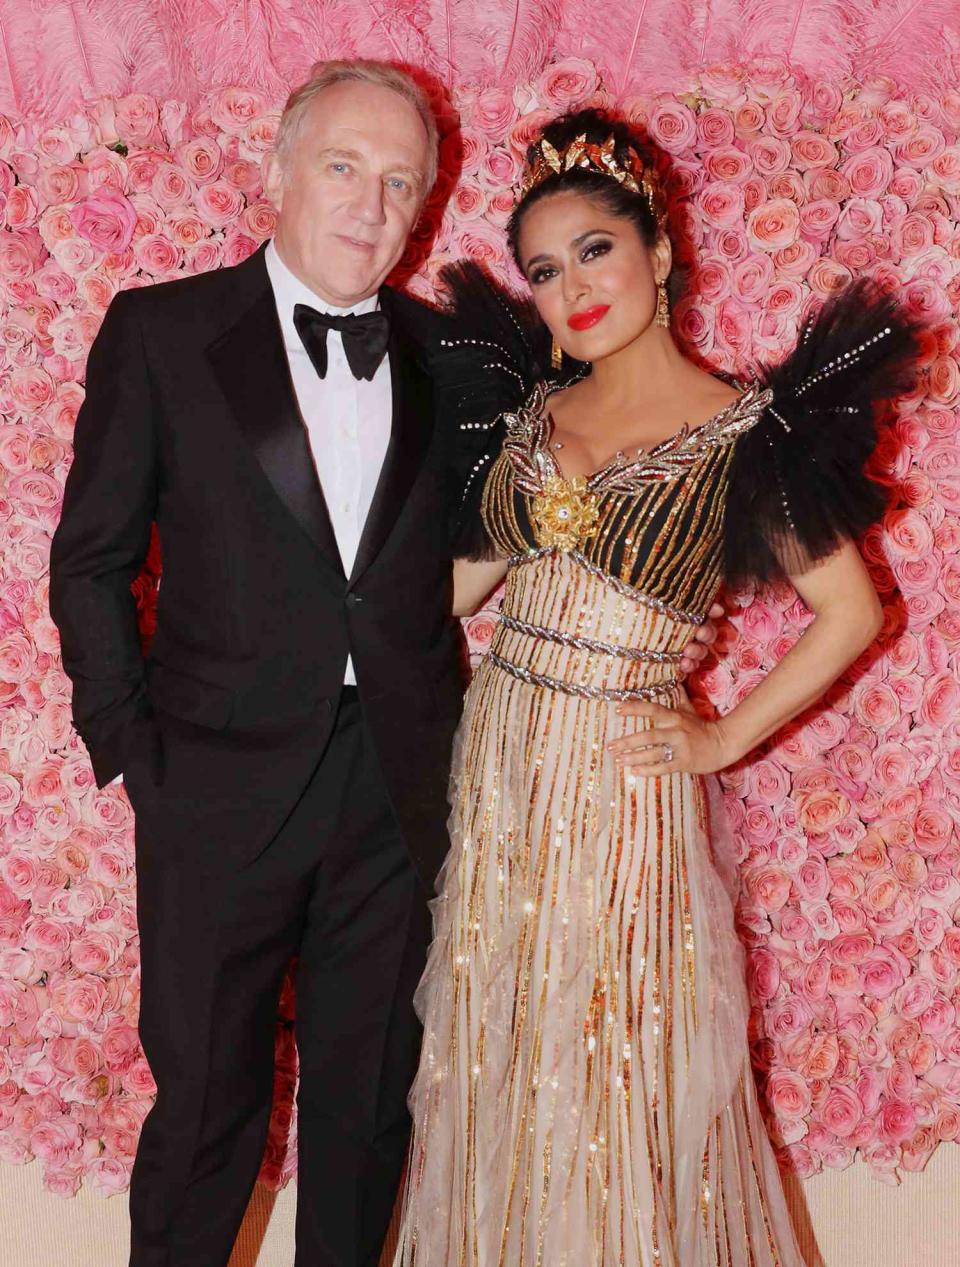 Salma Hayek and François-Henri Pinault attend The 2019 Met Gala Celebrating Camp: Notes on Fashion at Metropolitan Museum of Art on May 06, 2019 in New York City